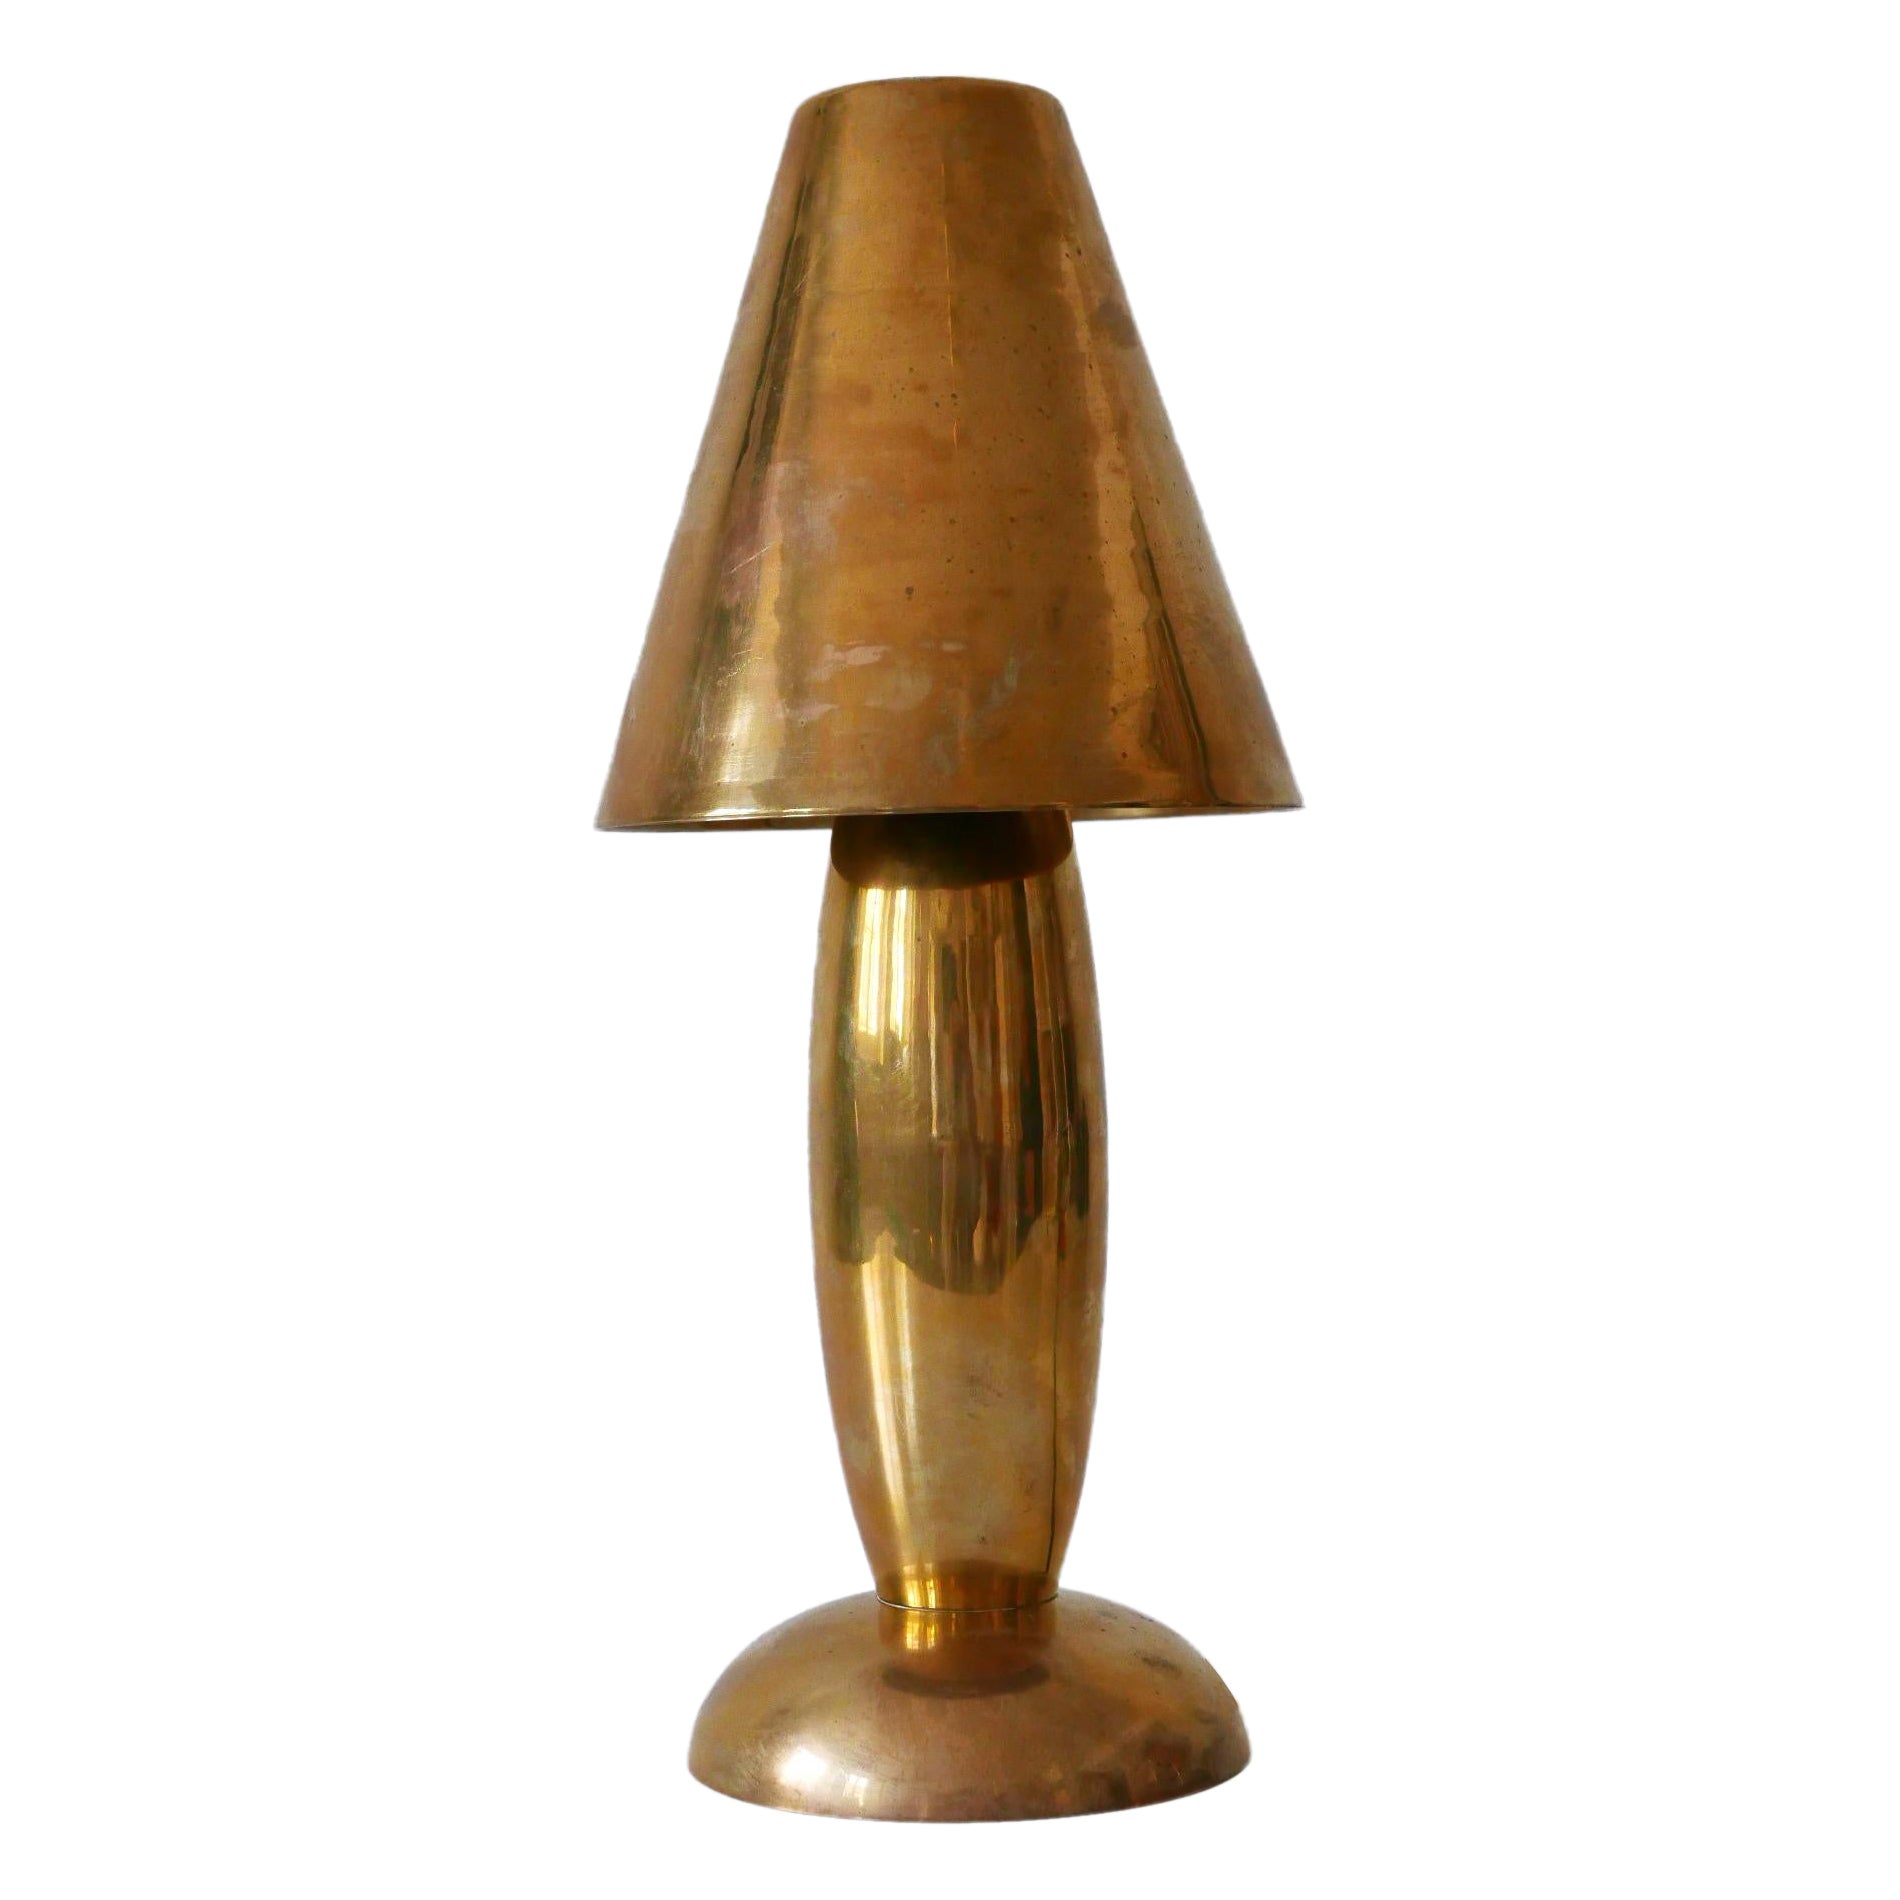 Rare & Lovely Mid-Century Modern Brass Side Table Lamp by Lambert Germany 1970s For Sale